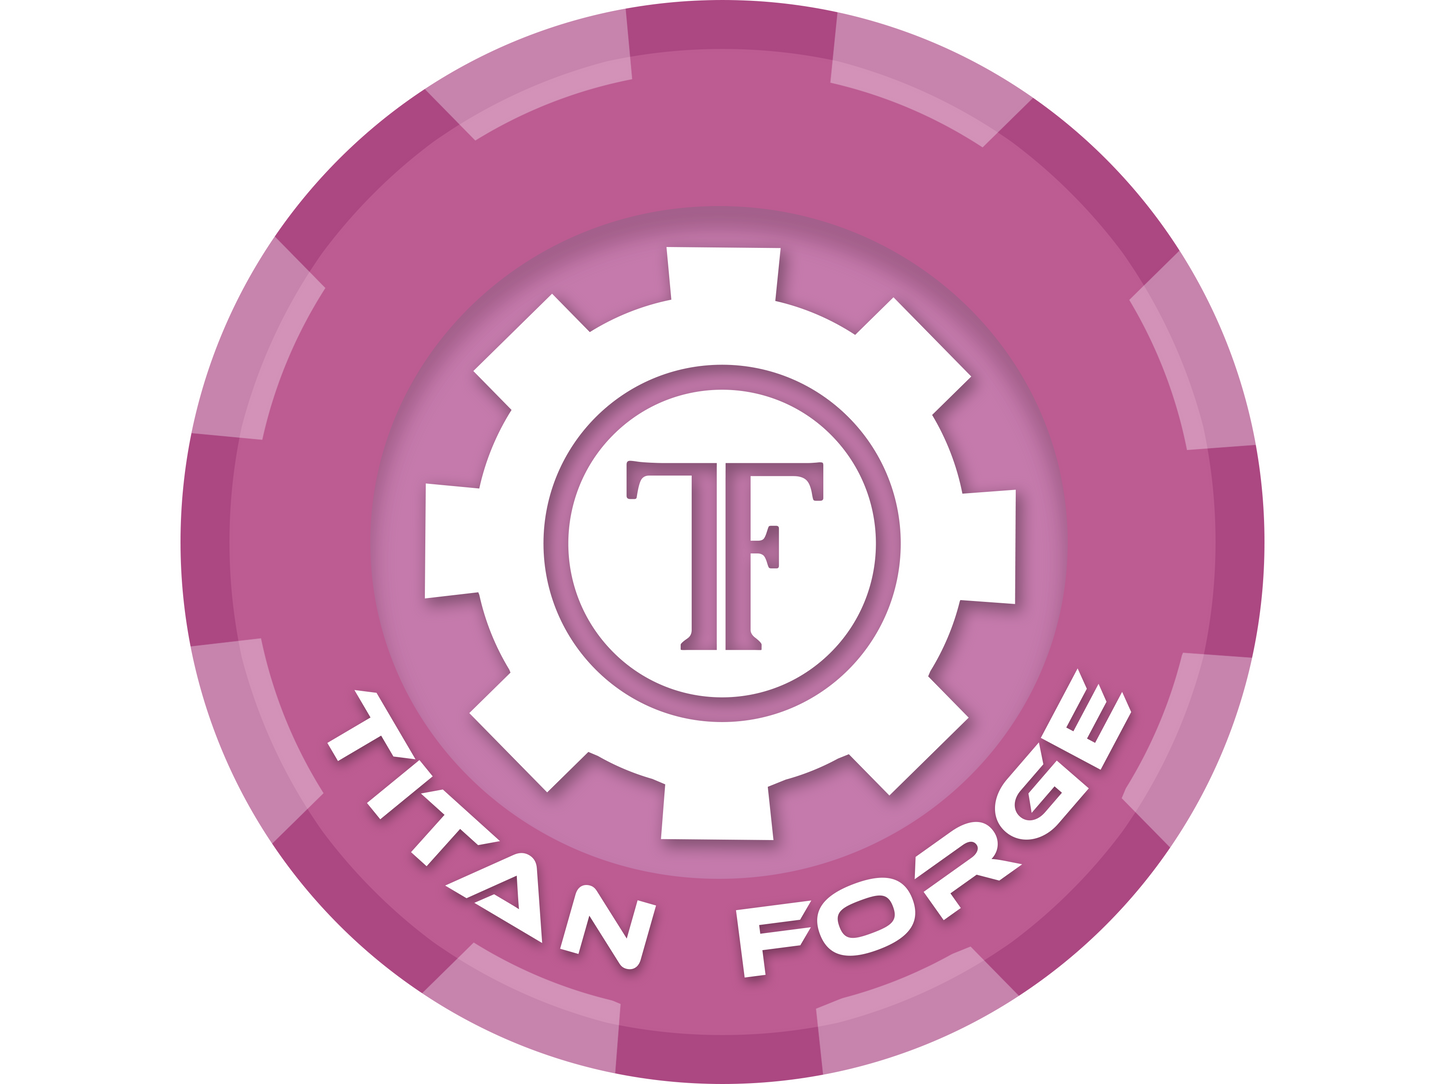 Titan Forge Pink Patch